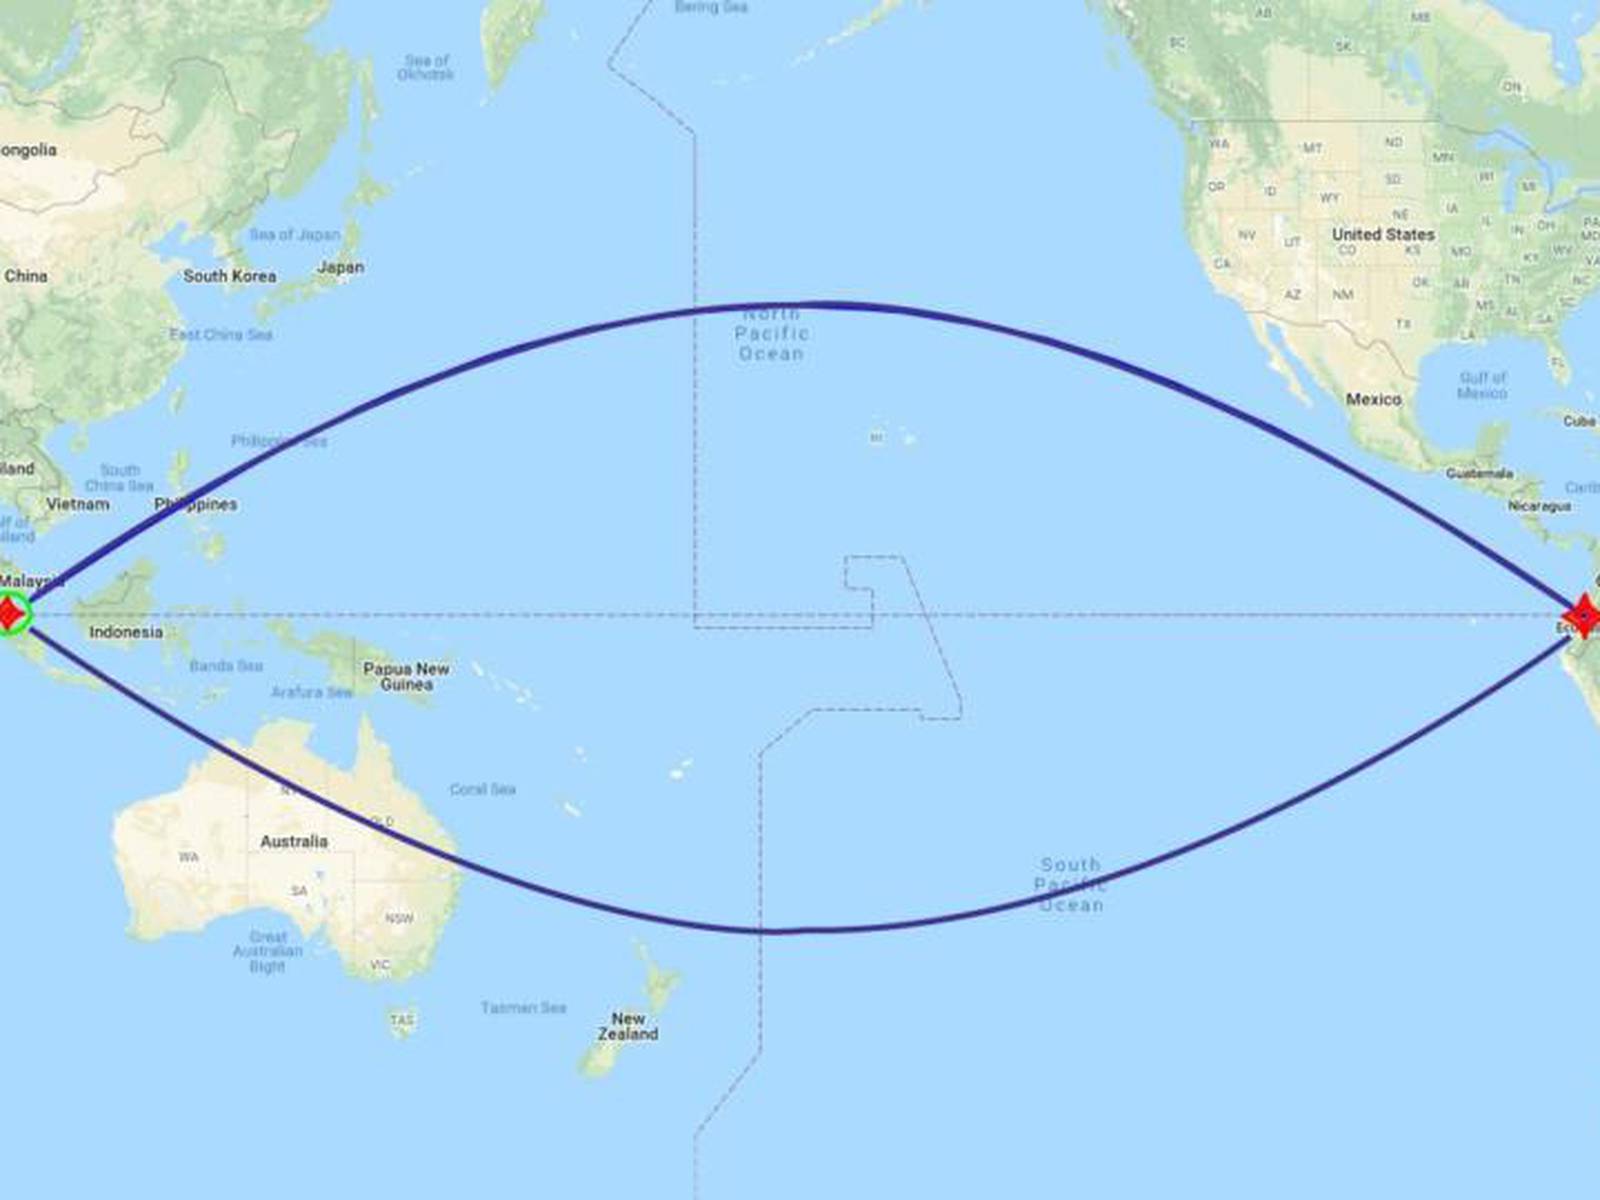 What is the shortest flight route between two points on earth? - Quora